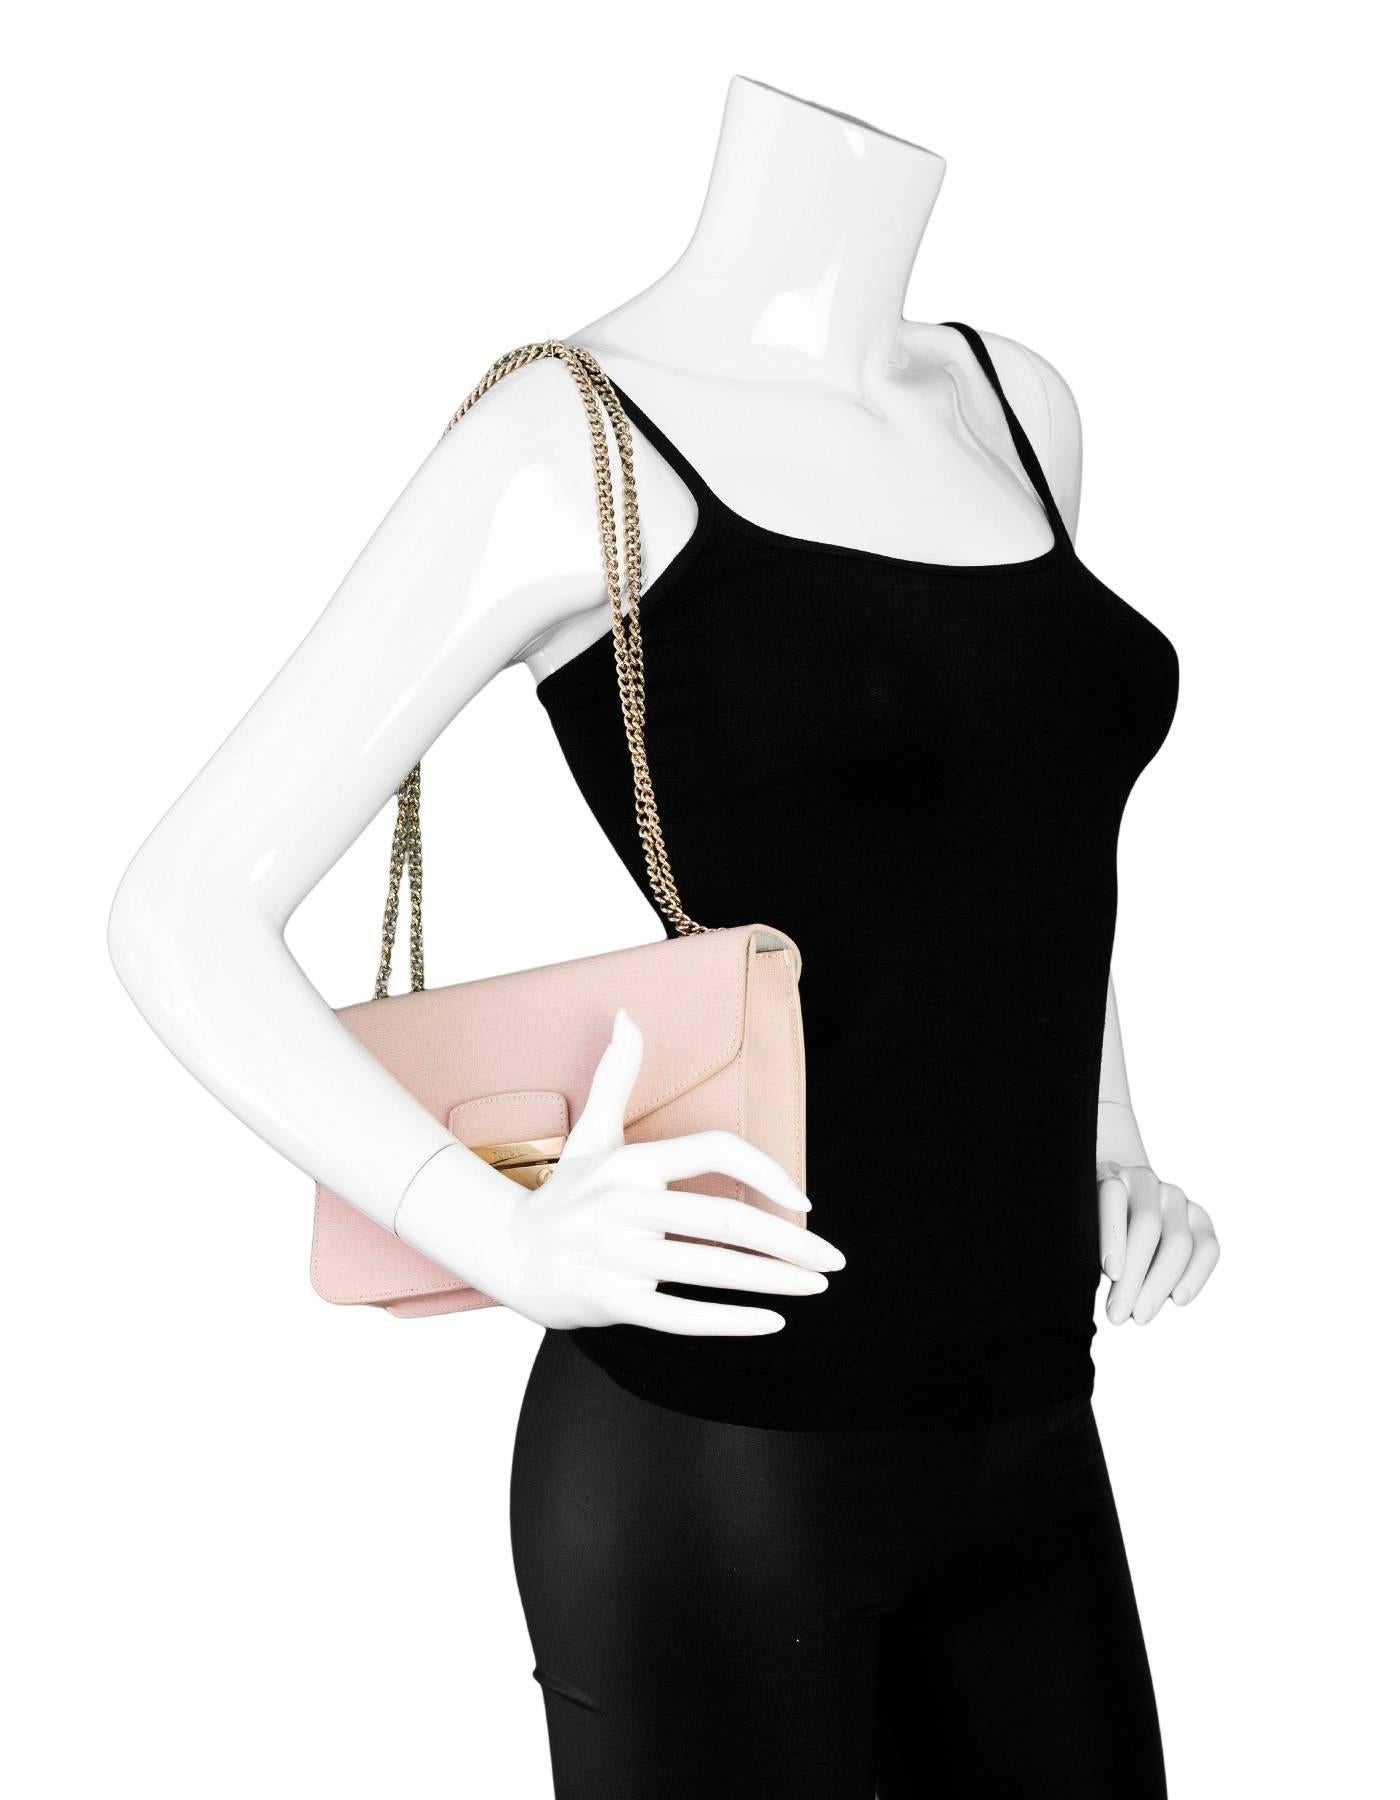 Furla Pink Saffiano Julia Pochette Shoulder Bag

Made In: Bulgaria
Color: Light pink
Hardware: Goldtone
Materials: Saffiano leather, metal
Lining: Pink textile
Closure/Opening: Push lock closure
Exterior Pockets: None
Interior Pockets: One zip